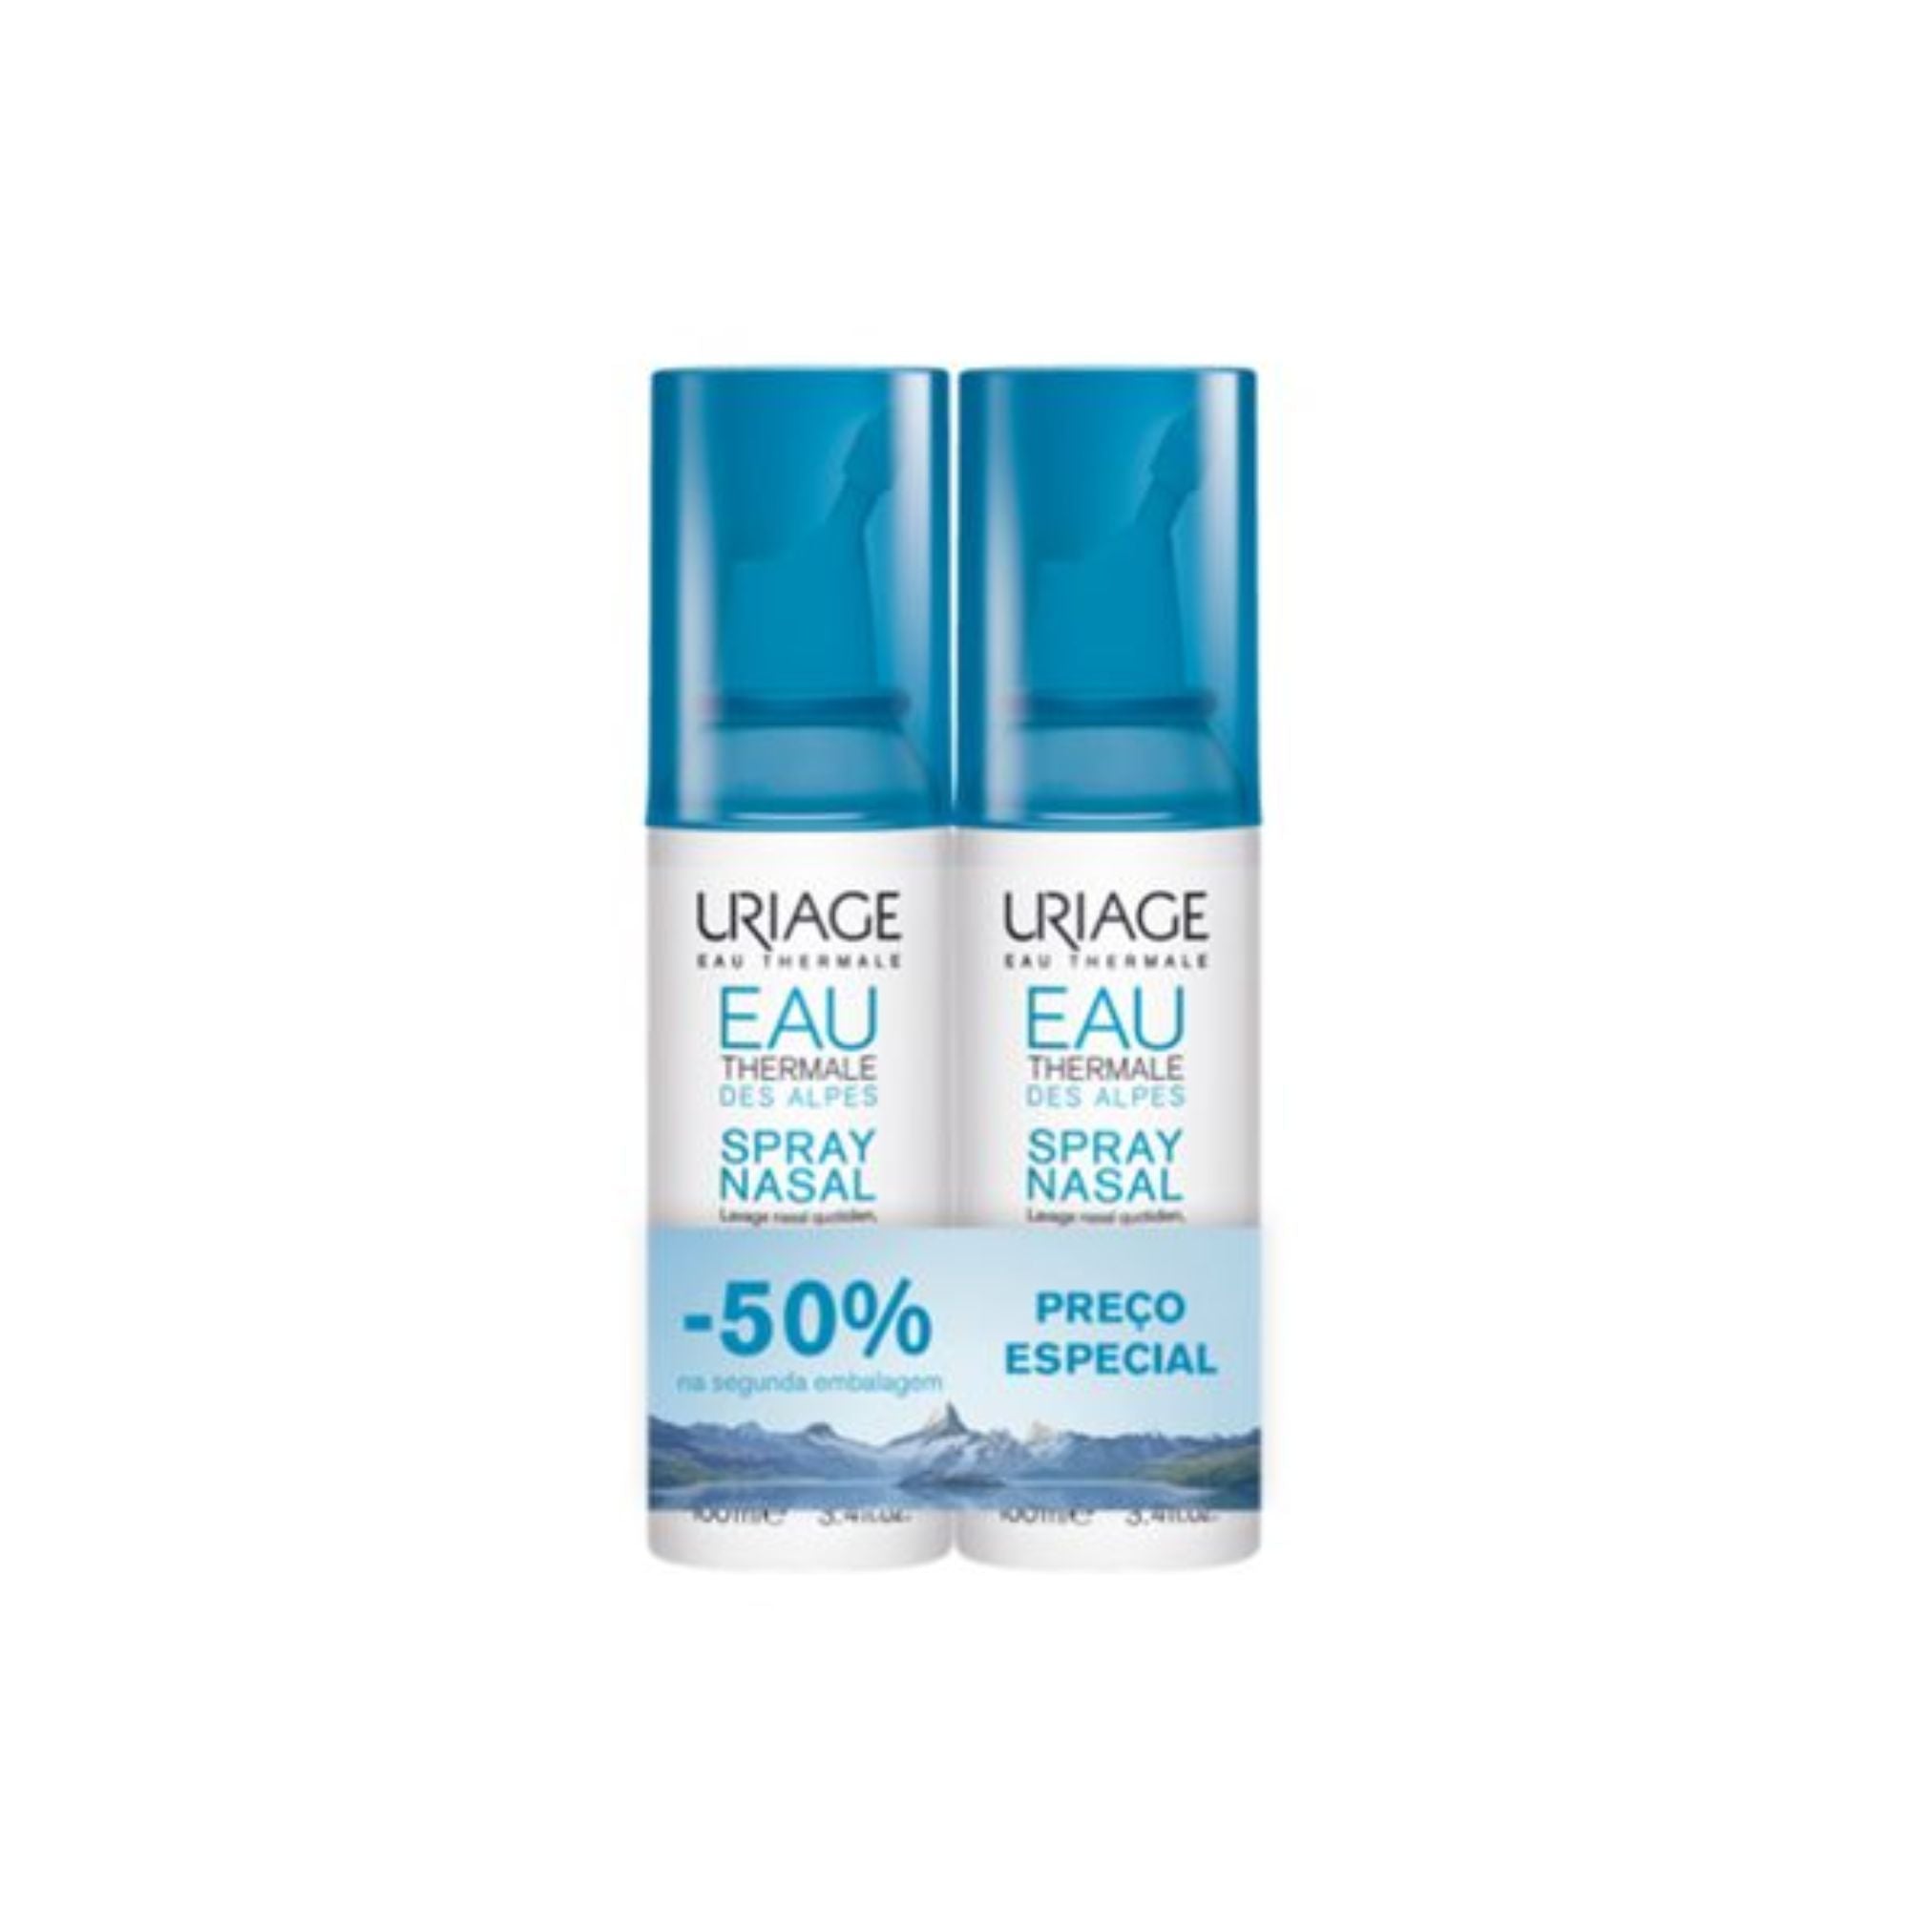 Uriage Promo Pack: Uriage Eau Thermale Nasal Spray 2x100ml